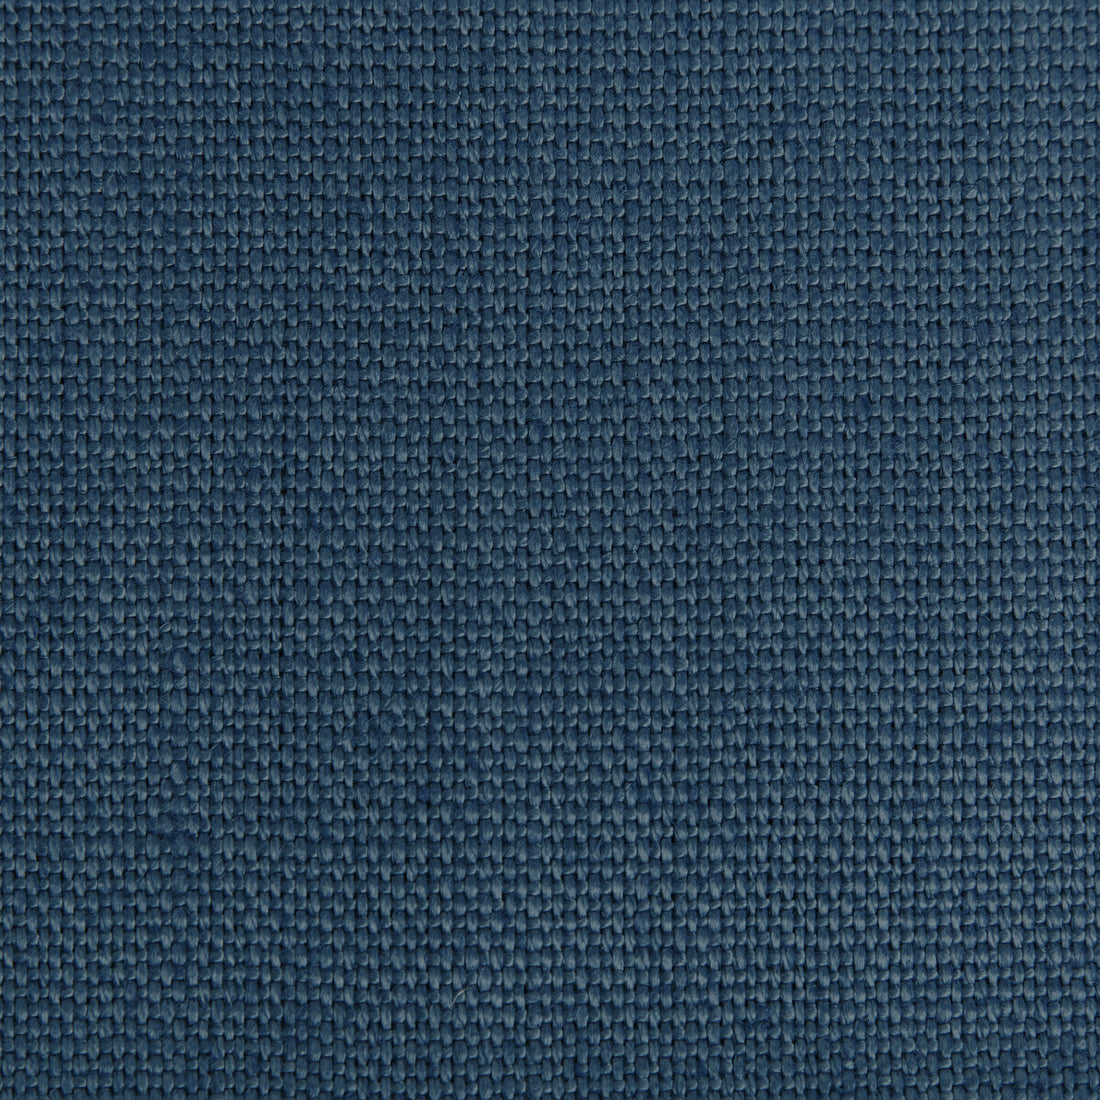 Hampton Linen fabric in harbour color - pattern 2012171.5.0 - by Lee Jofa in the Colour Complements II collection